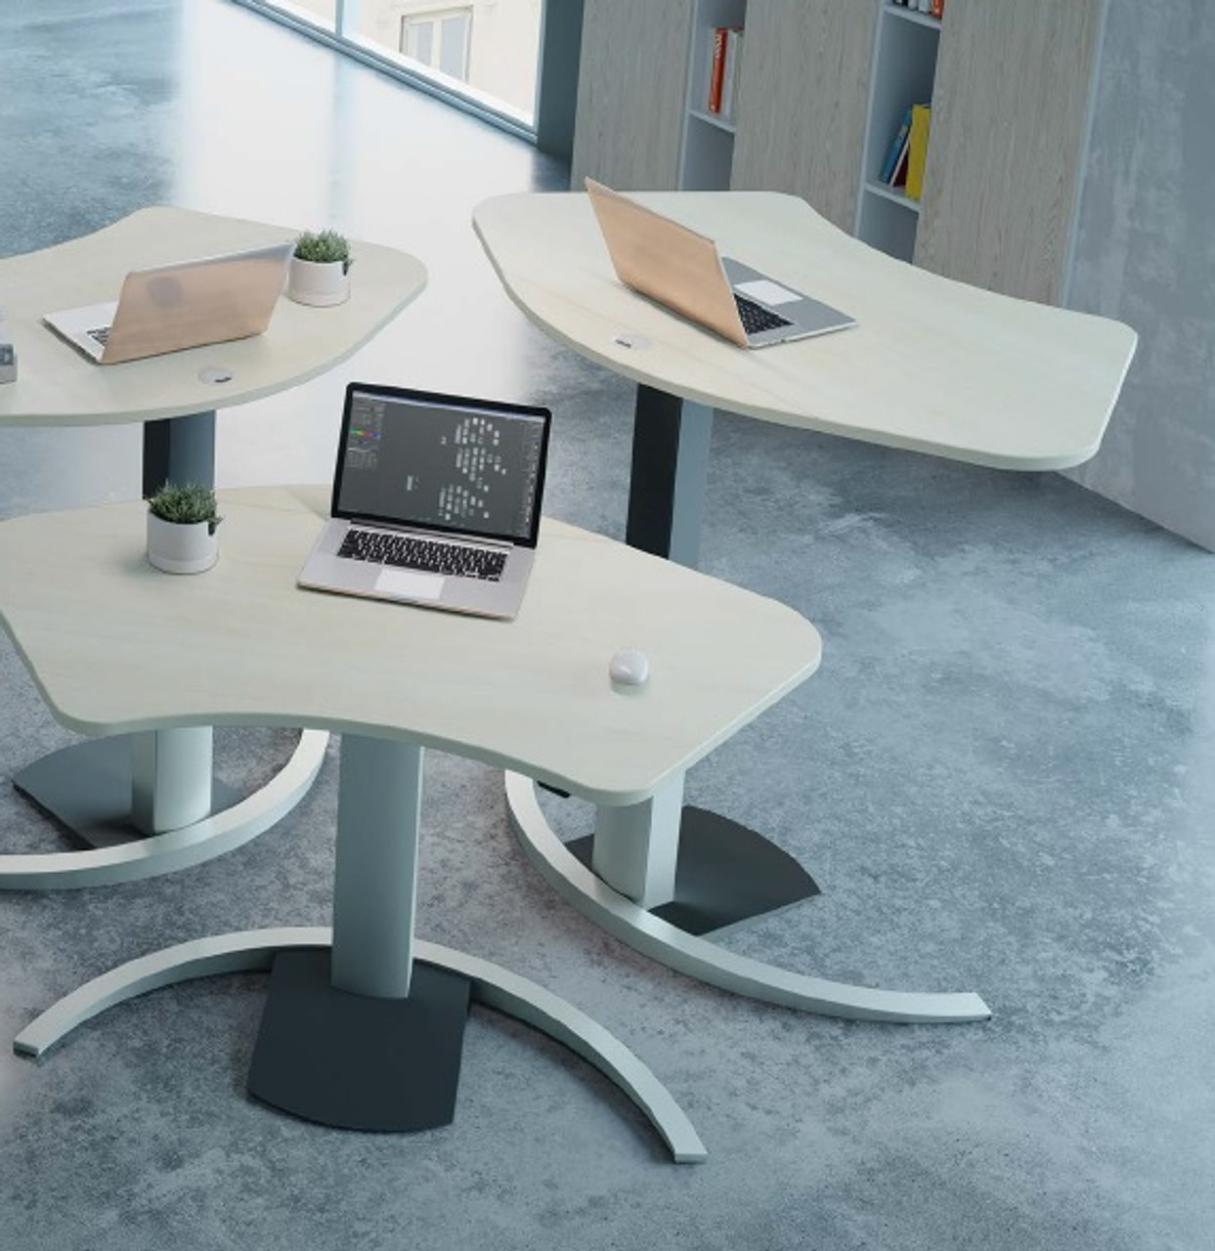 How Do Electric Height Adjustable Desks Help Improve Productivity and Focus?